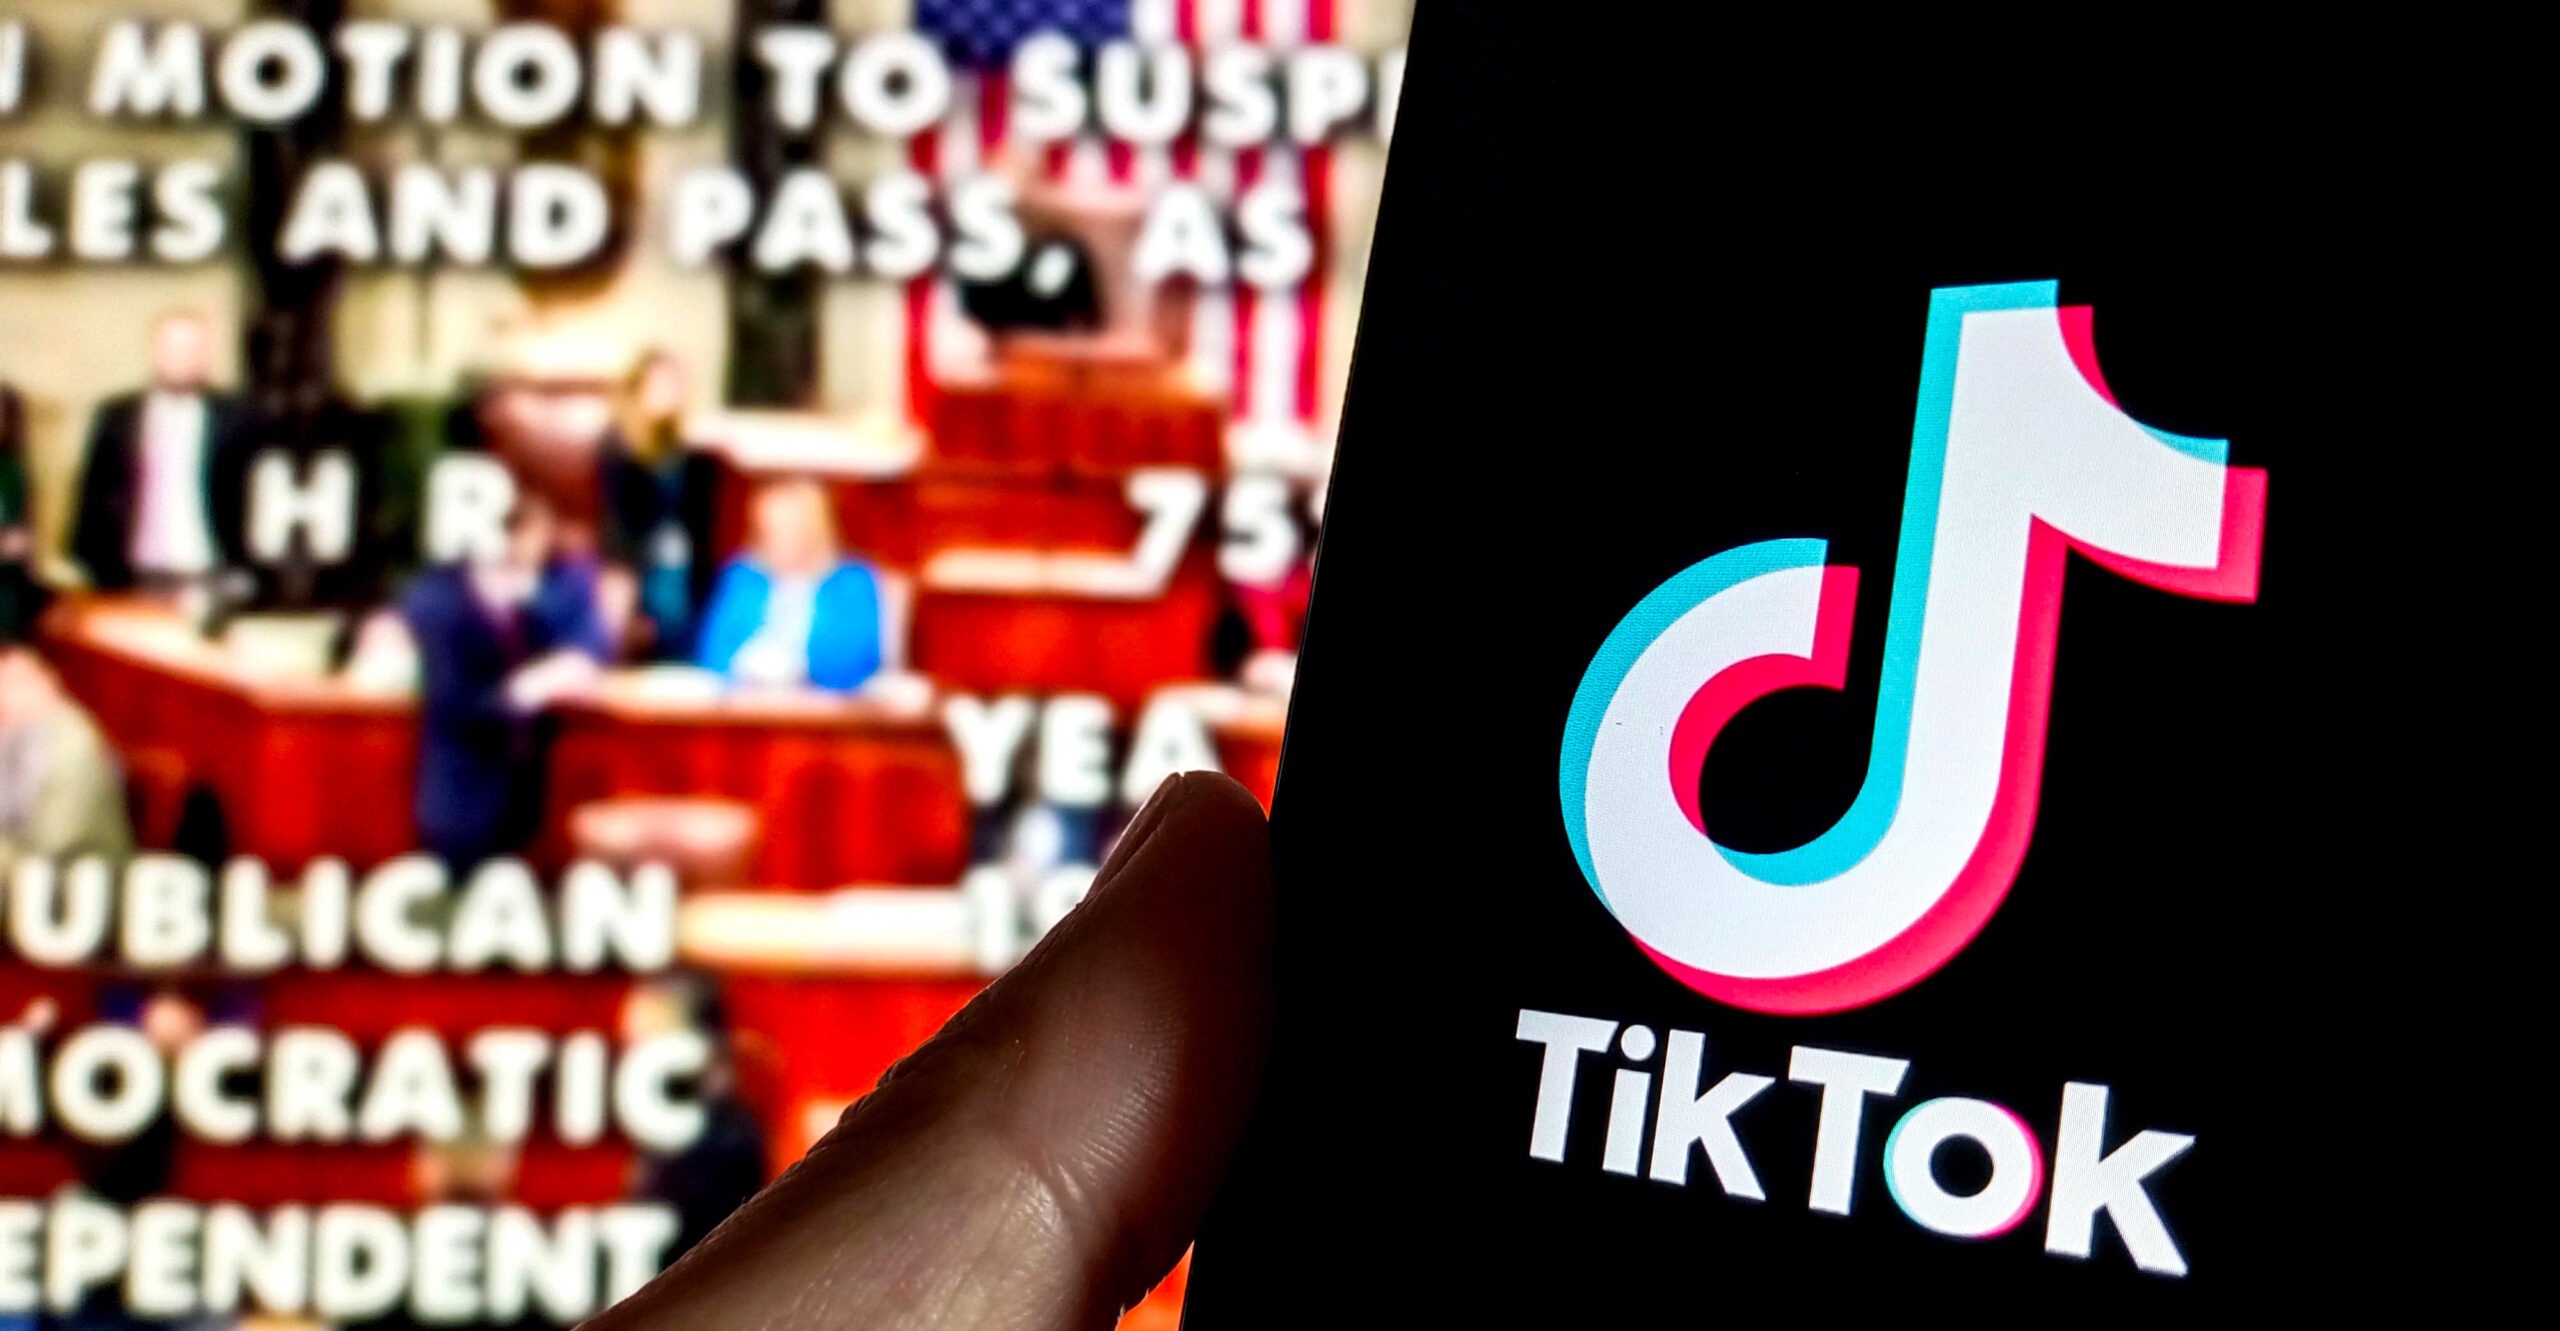 Congress Can Condition TikTok's Continued Operation in US on Severing All Ties With China